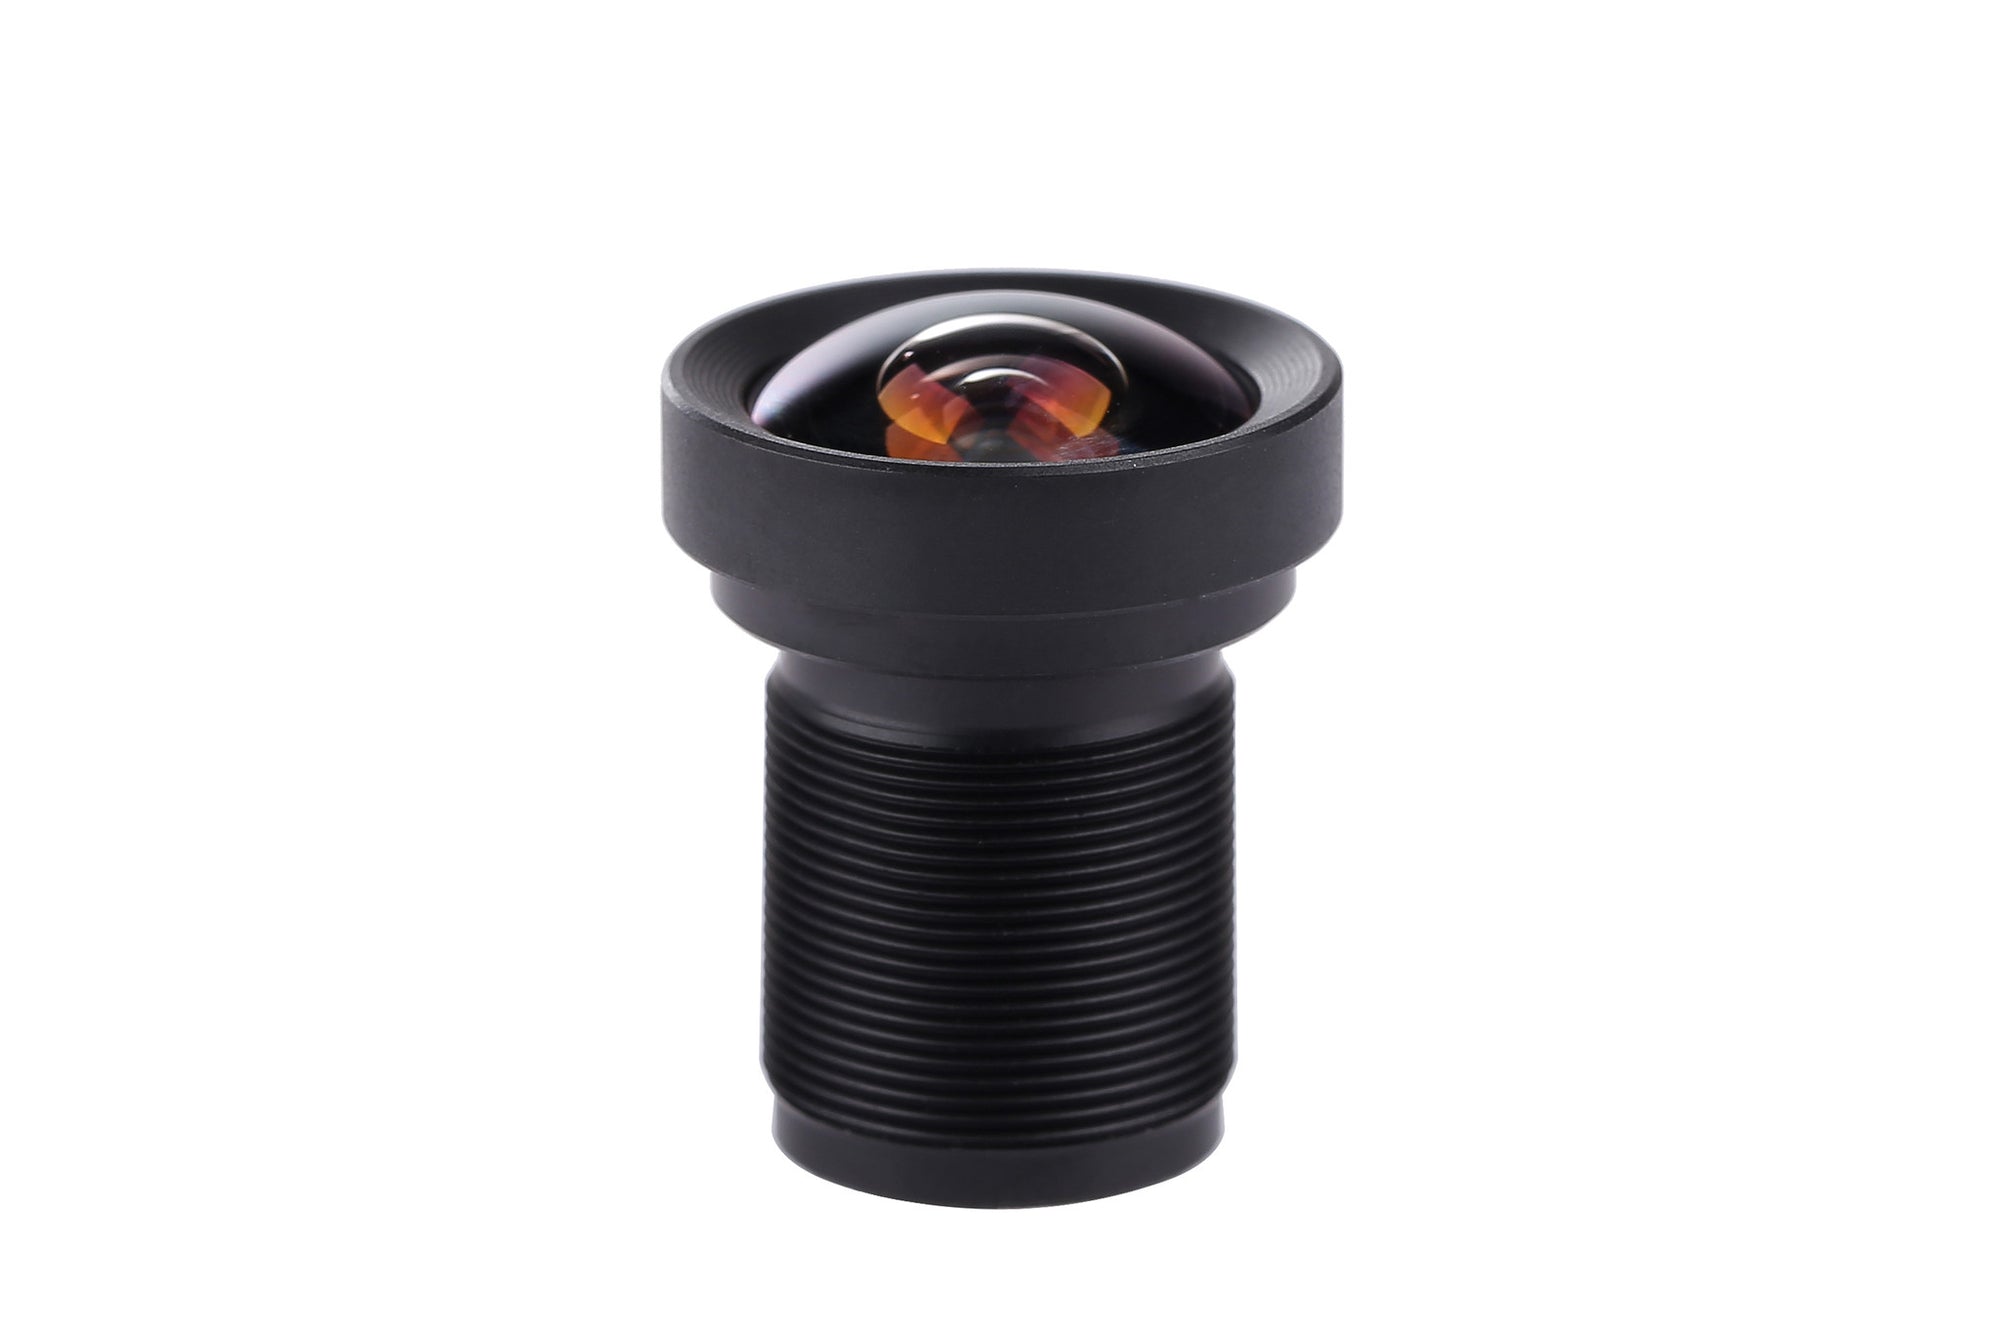 NEWLY 16MP 1/2.3" FLAT LENS FOR GOPRO COMING